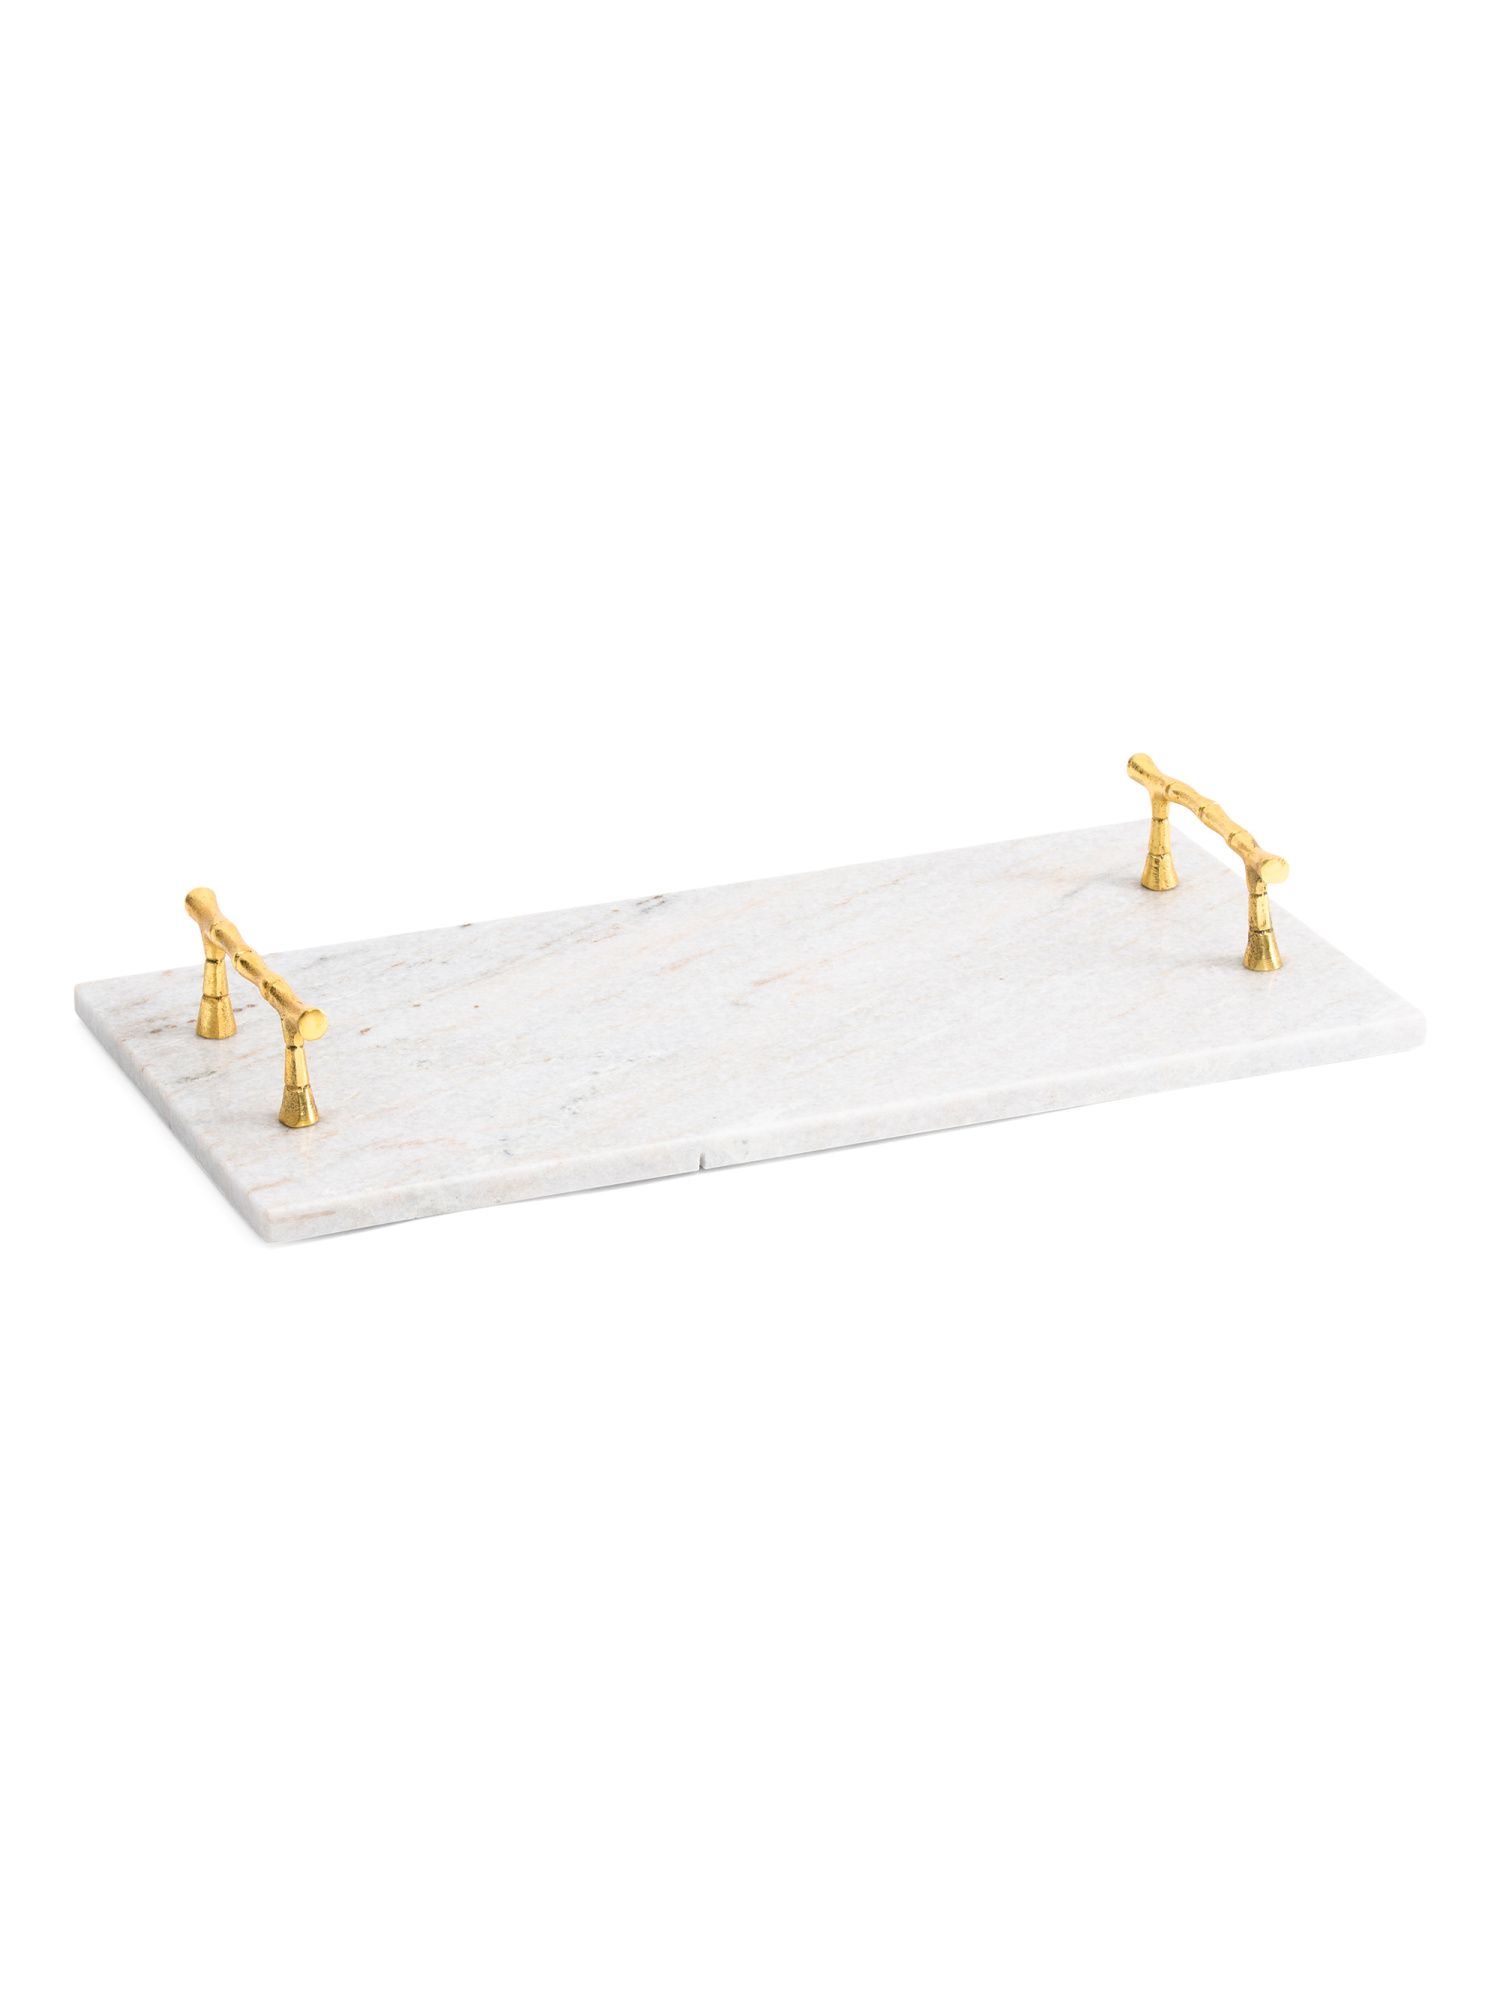 Marble Tray With Brass Handles | Home | Marshalls | Marshalls